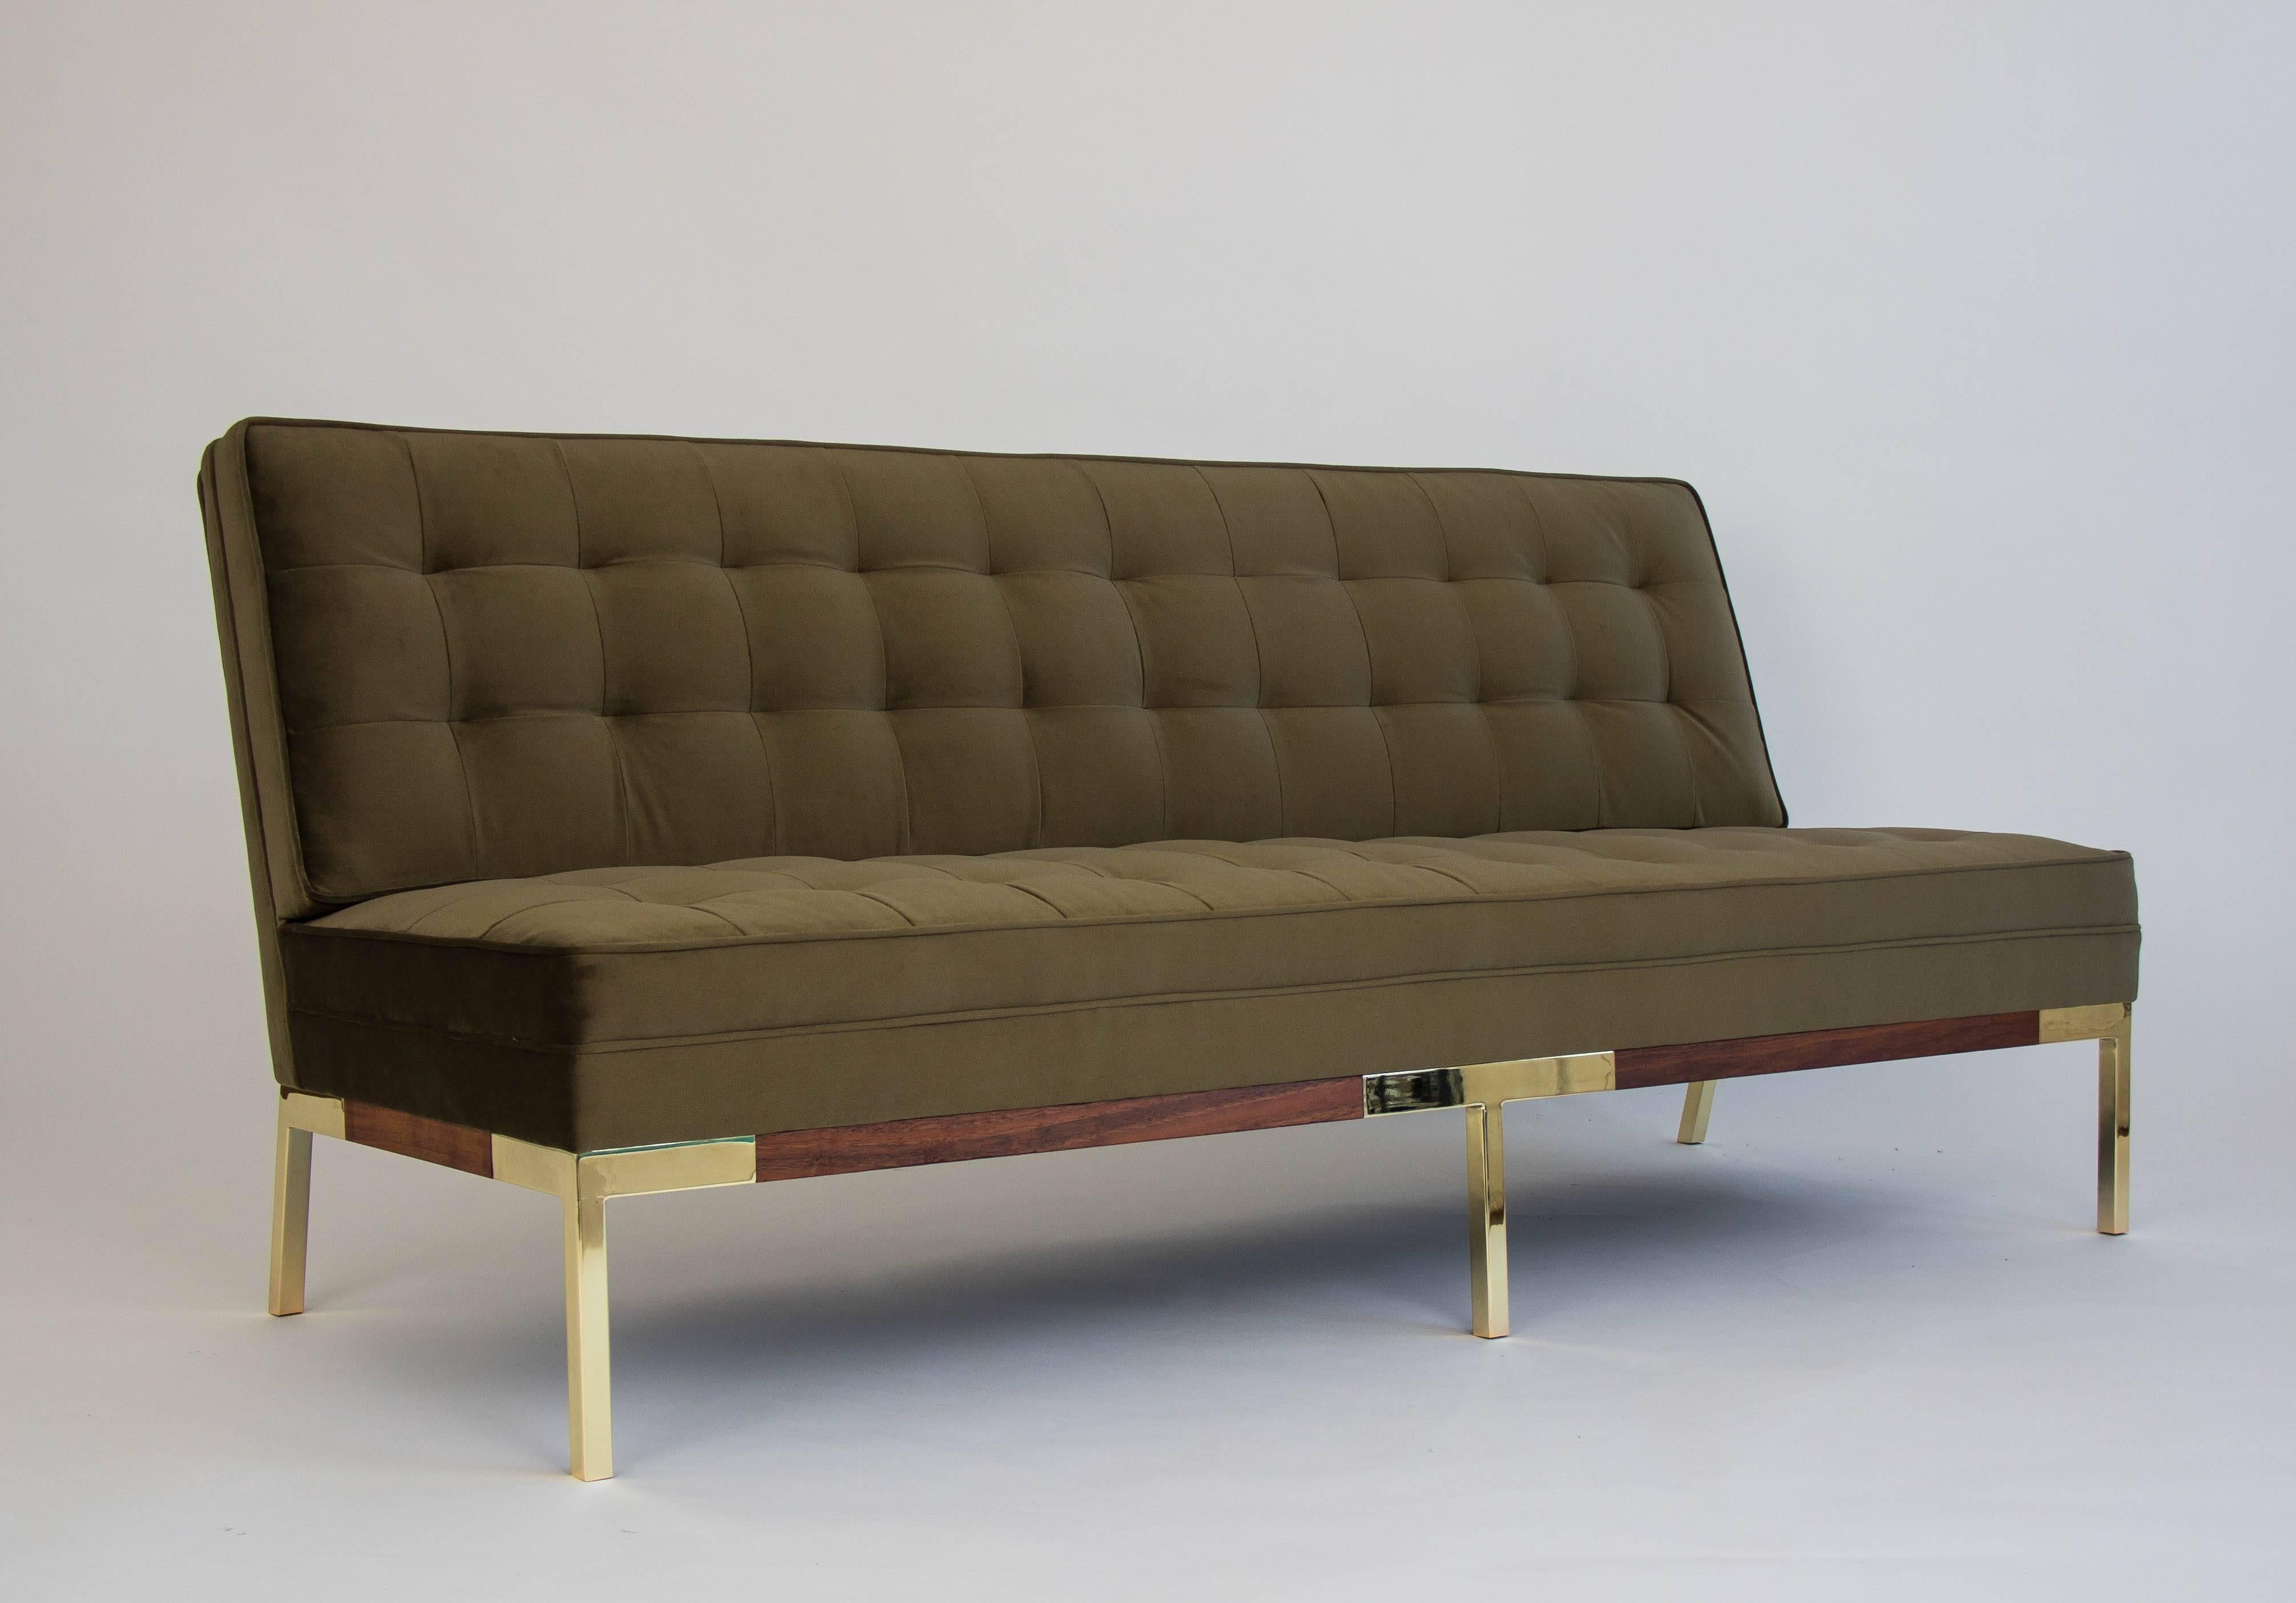 A fully restored sofa by Lee Woodard for Woodard Furniture has a three-seat design with integrated backrests and seat cushions. The olive green velvet upholstery is quilted according to the original design and welted corners emphasize the structured